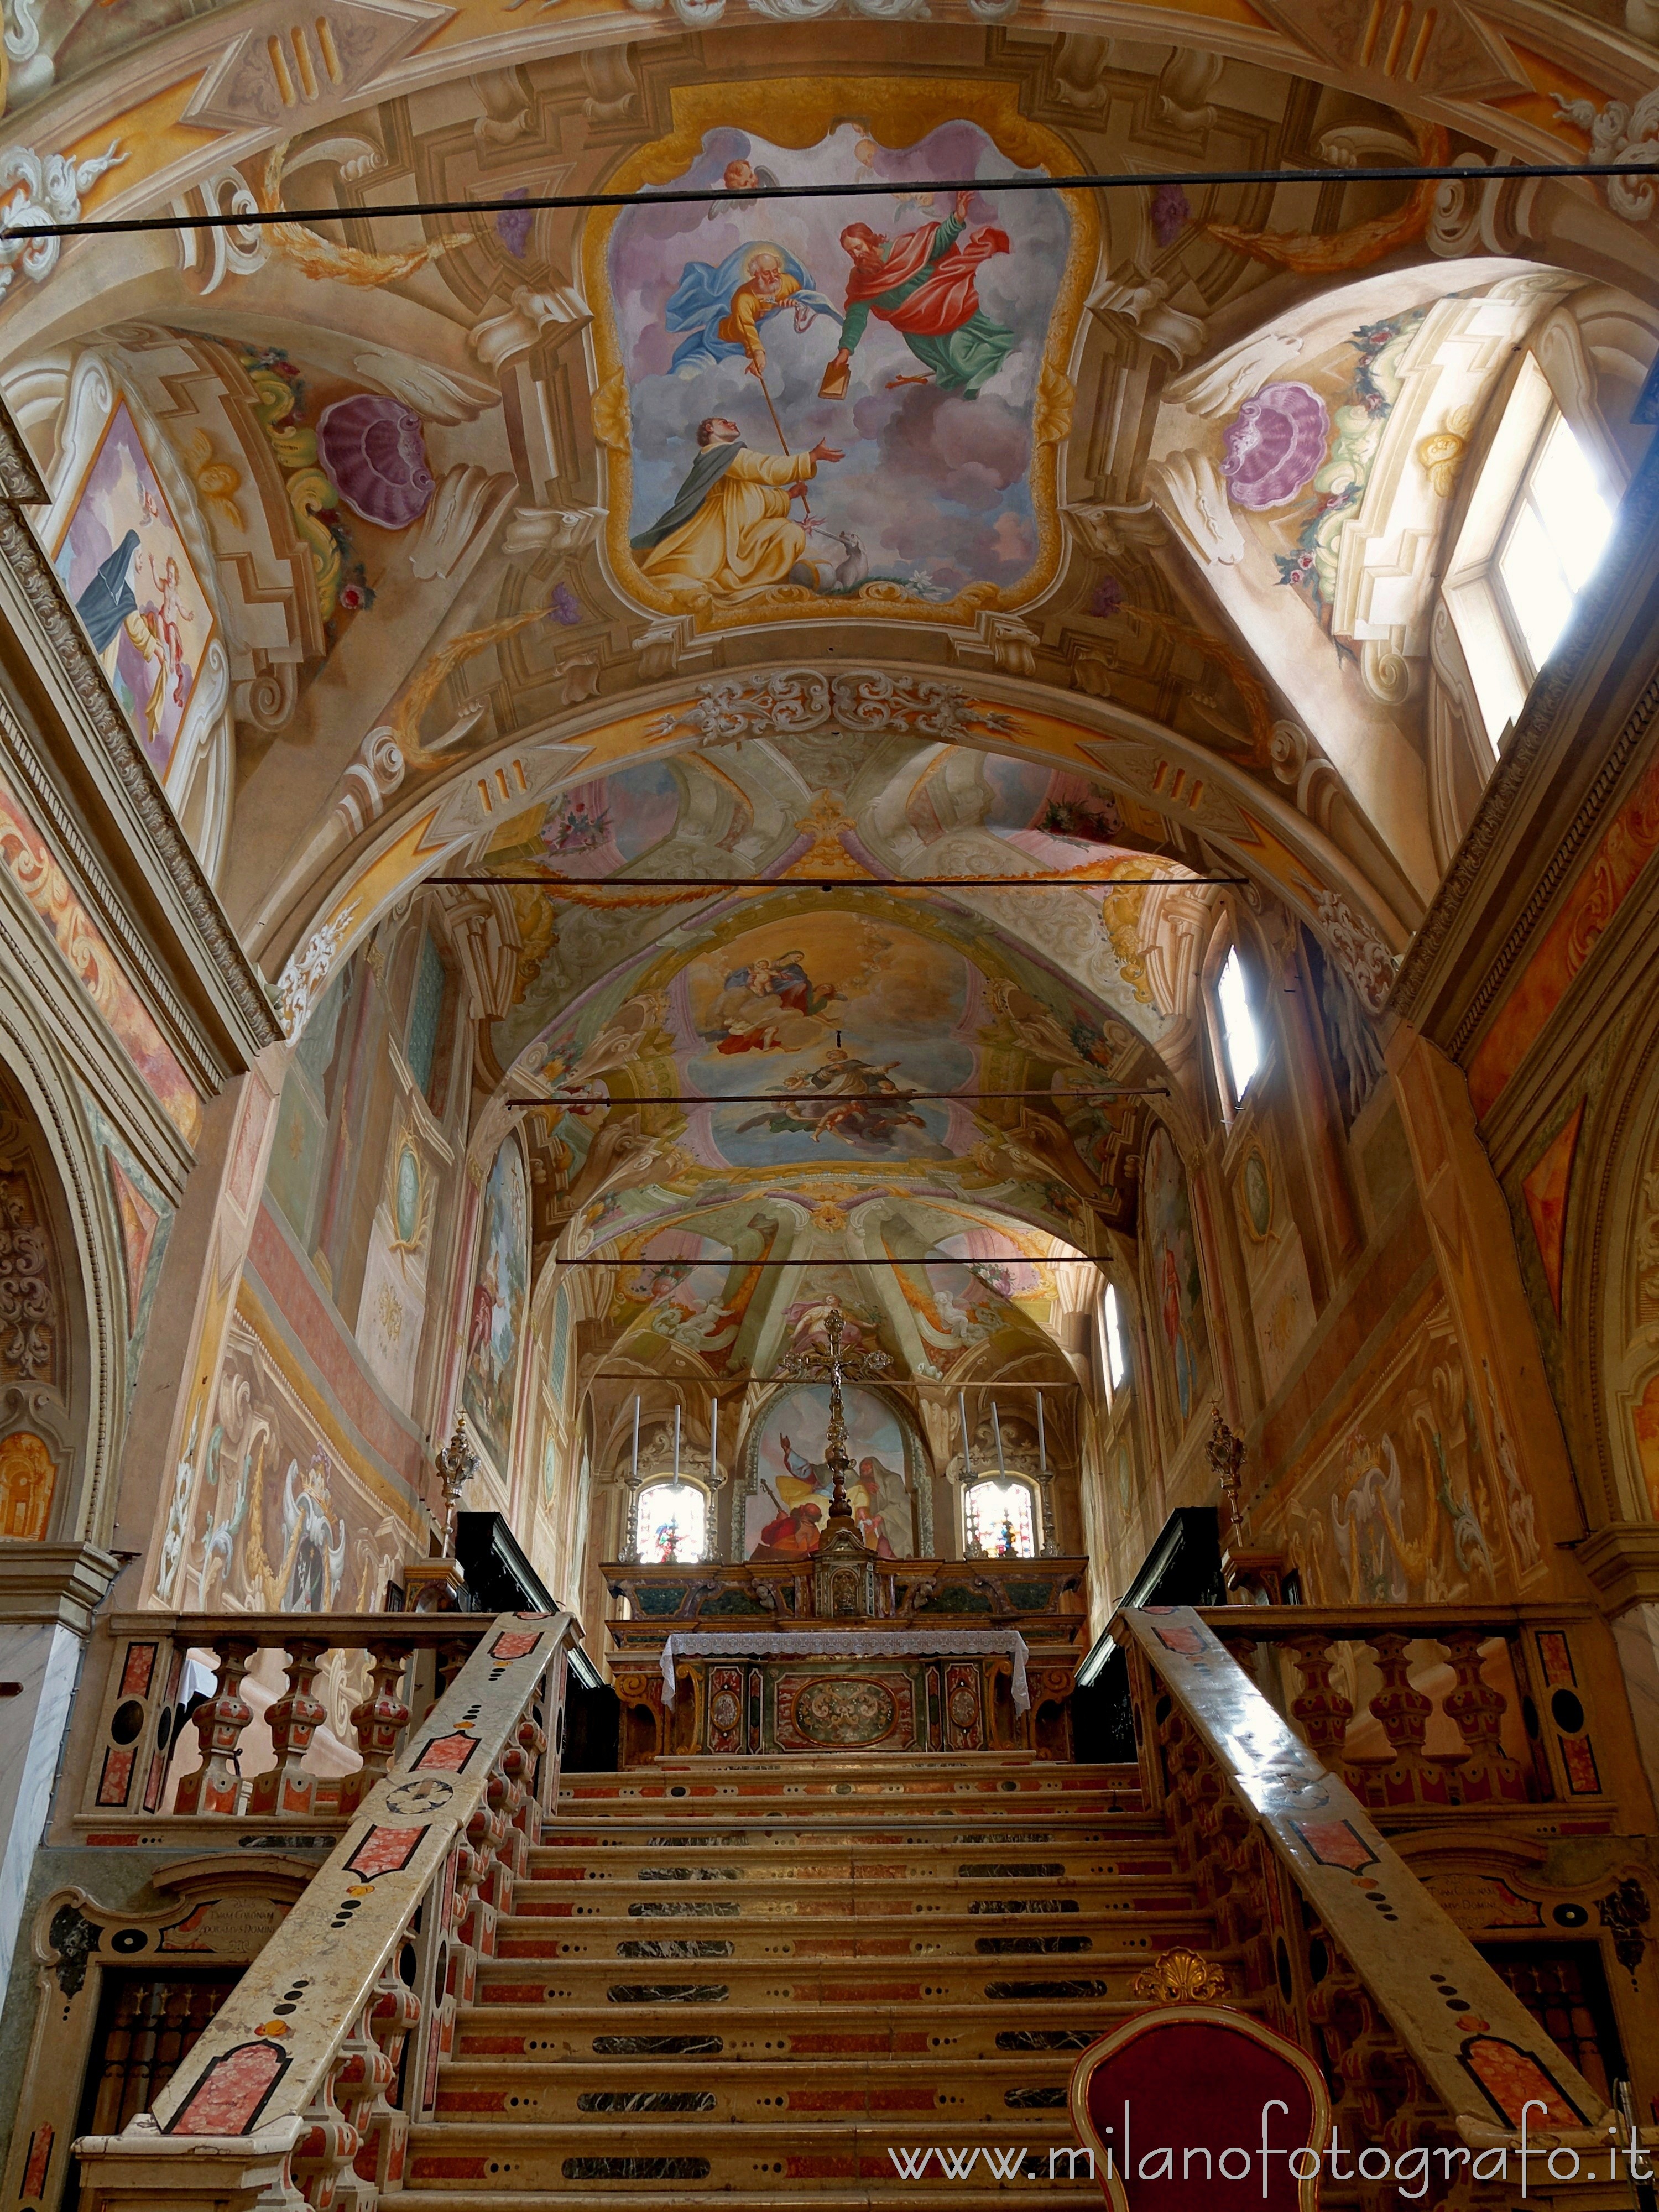 Soncino (Cremona, Italy): Staircase of the presbytery of the Church of San Giacomo - Soncino (Cremona, Italy)